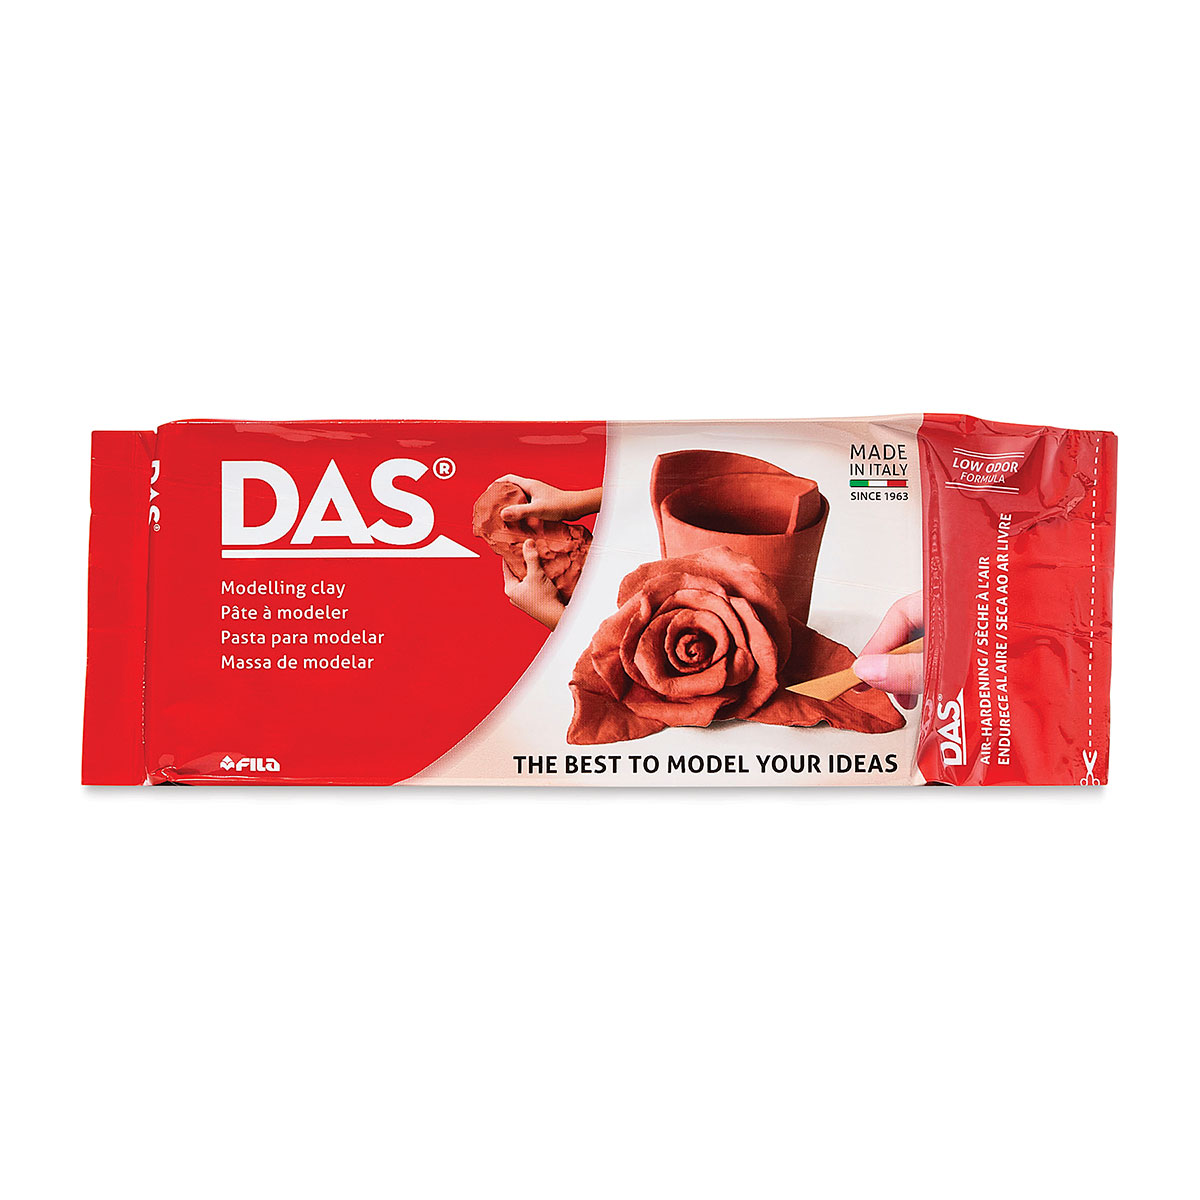 DAS Terracotta Modelling Clay Made in Italy 2.2 lbs F387600 NEW